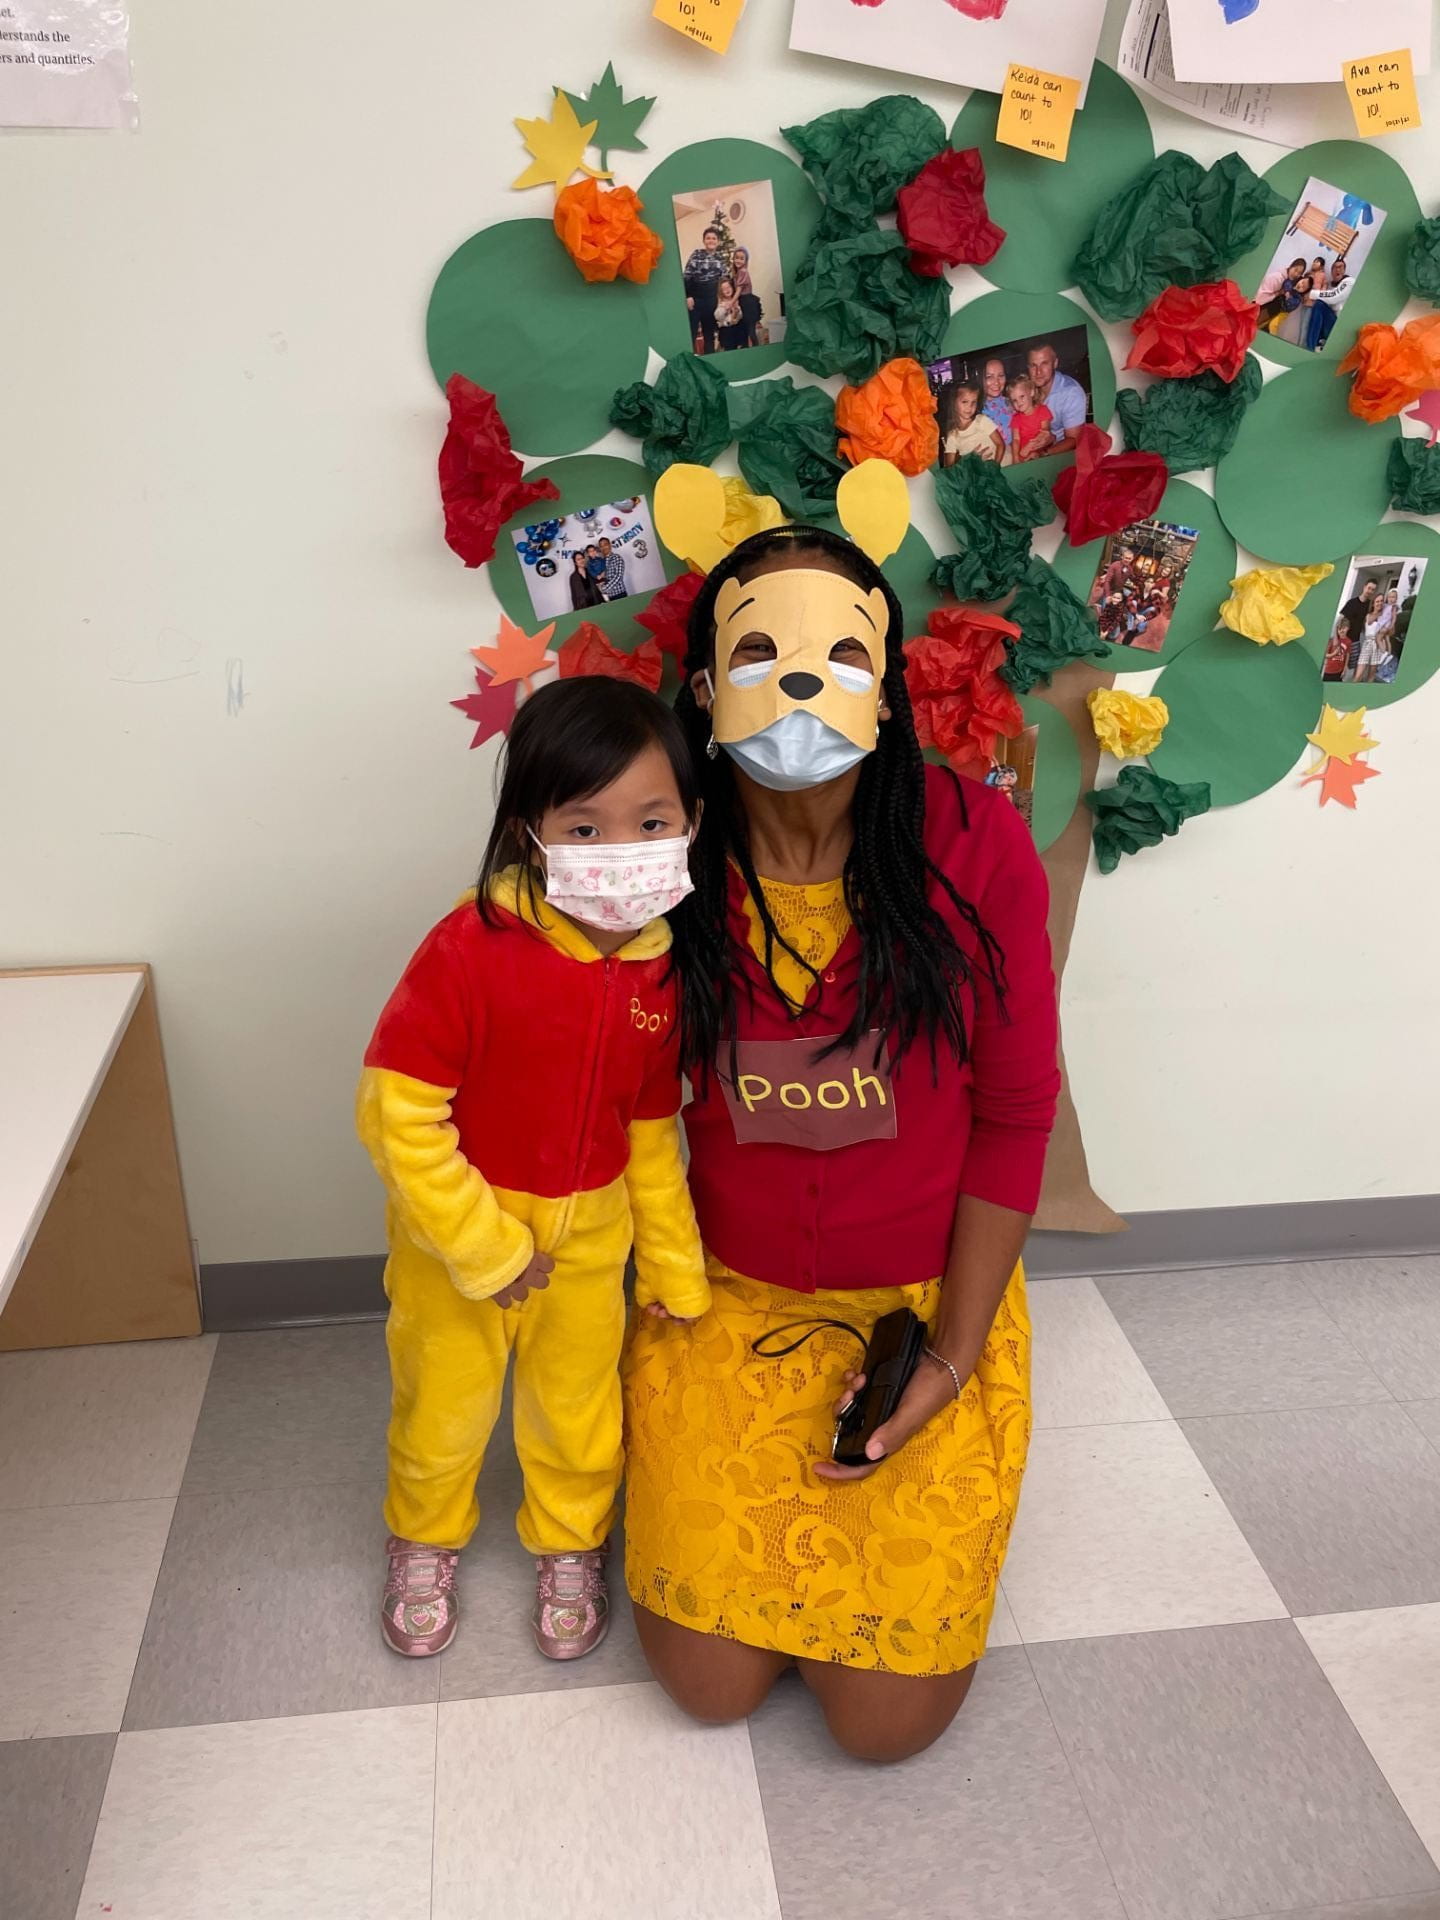 Ms. Dure dressed as Pooh taking a photo with mini ooh